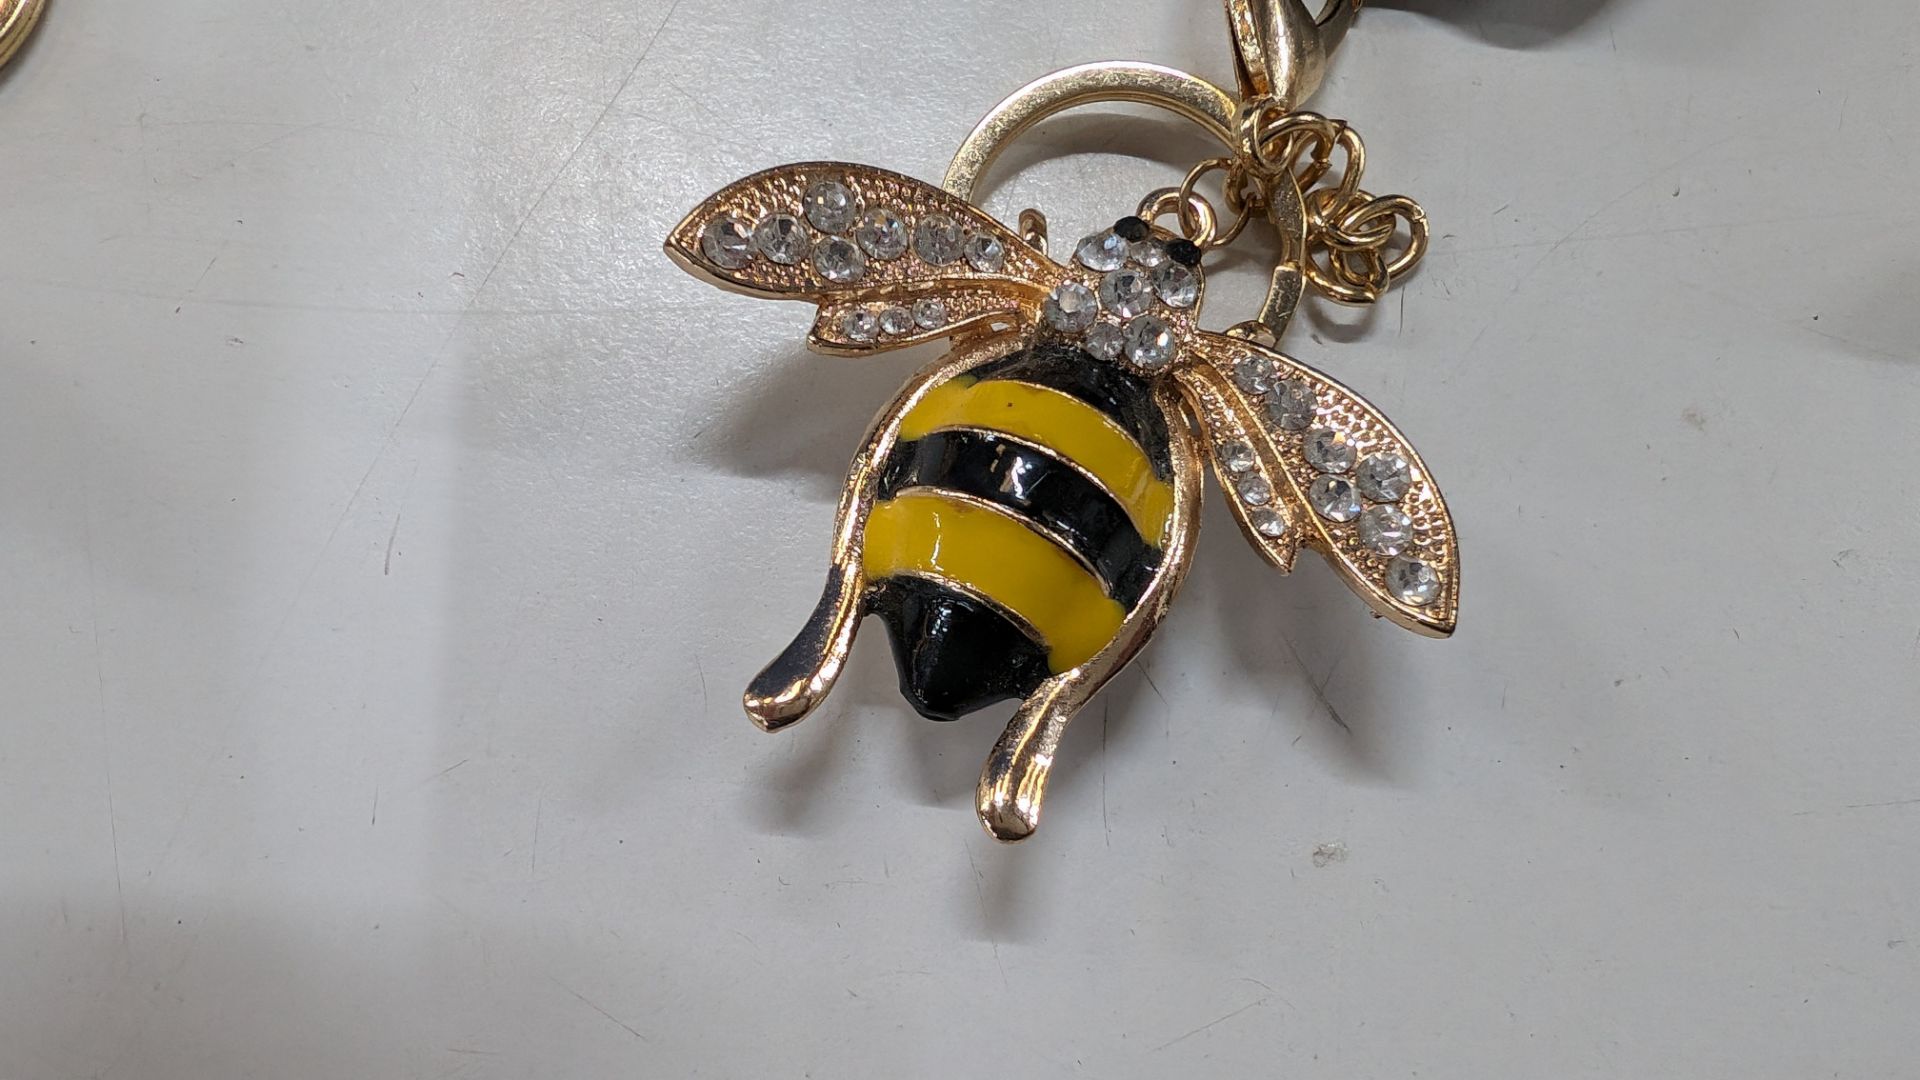 4 off highly decorative bee keyrings - Image 4 of 6